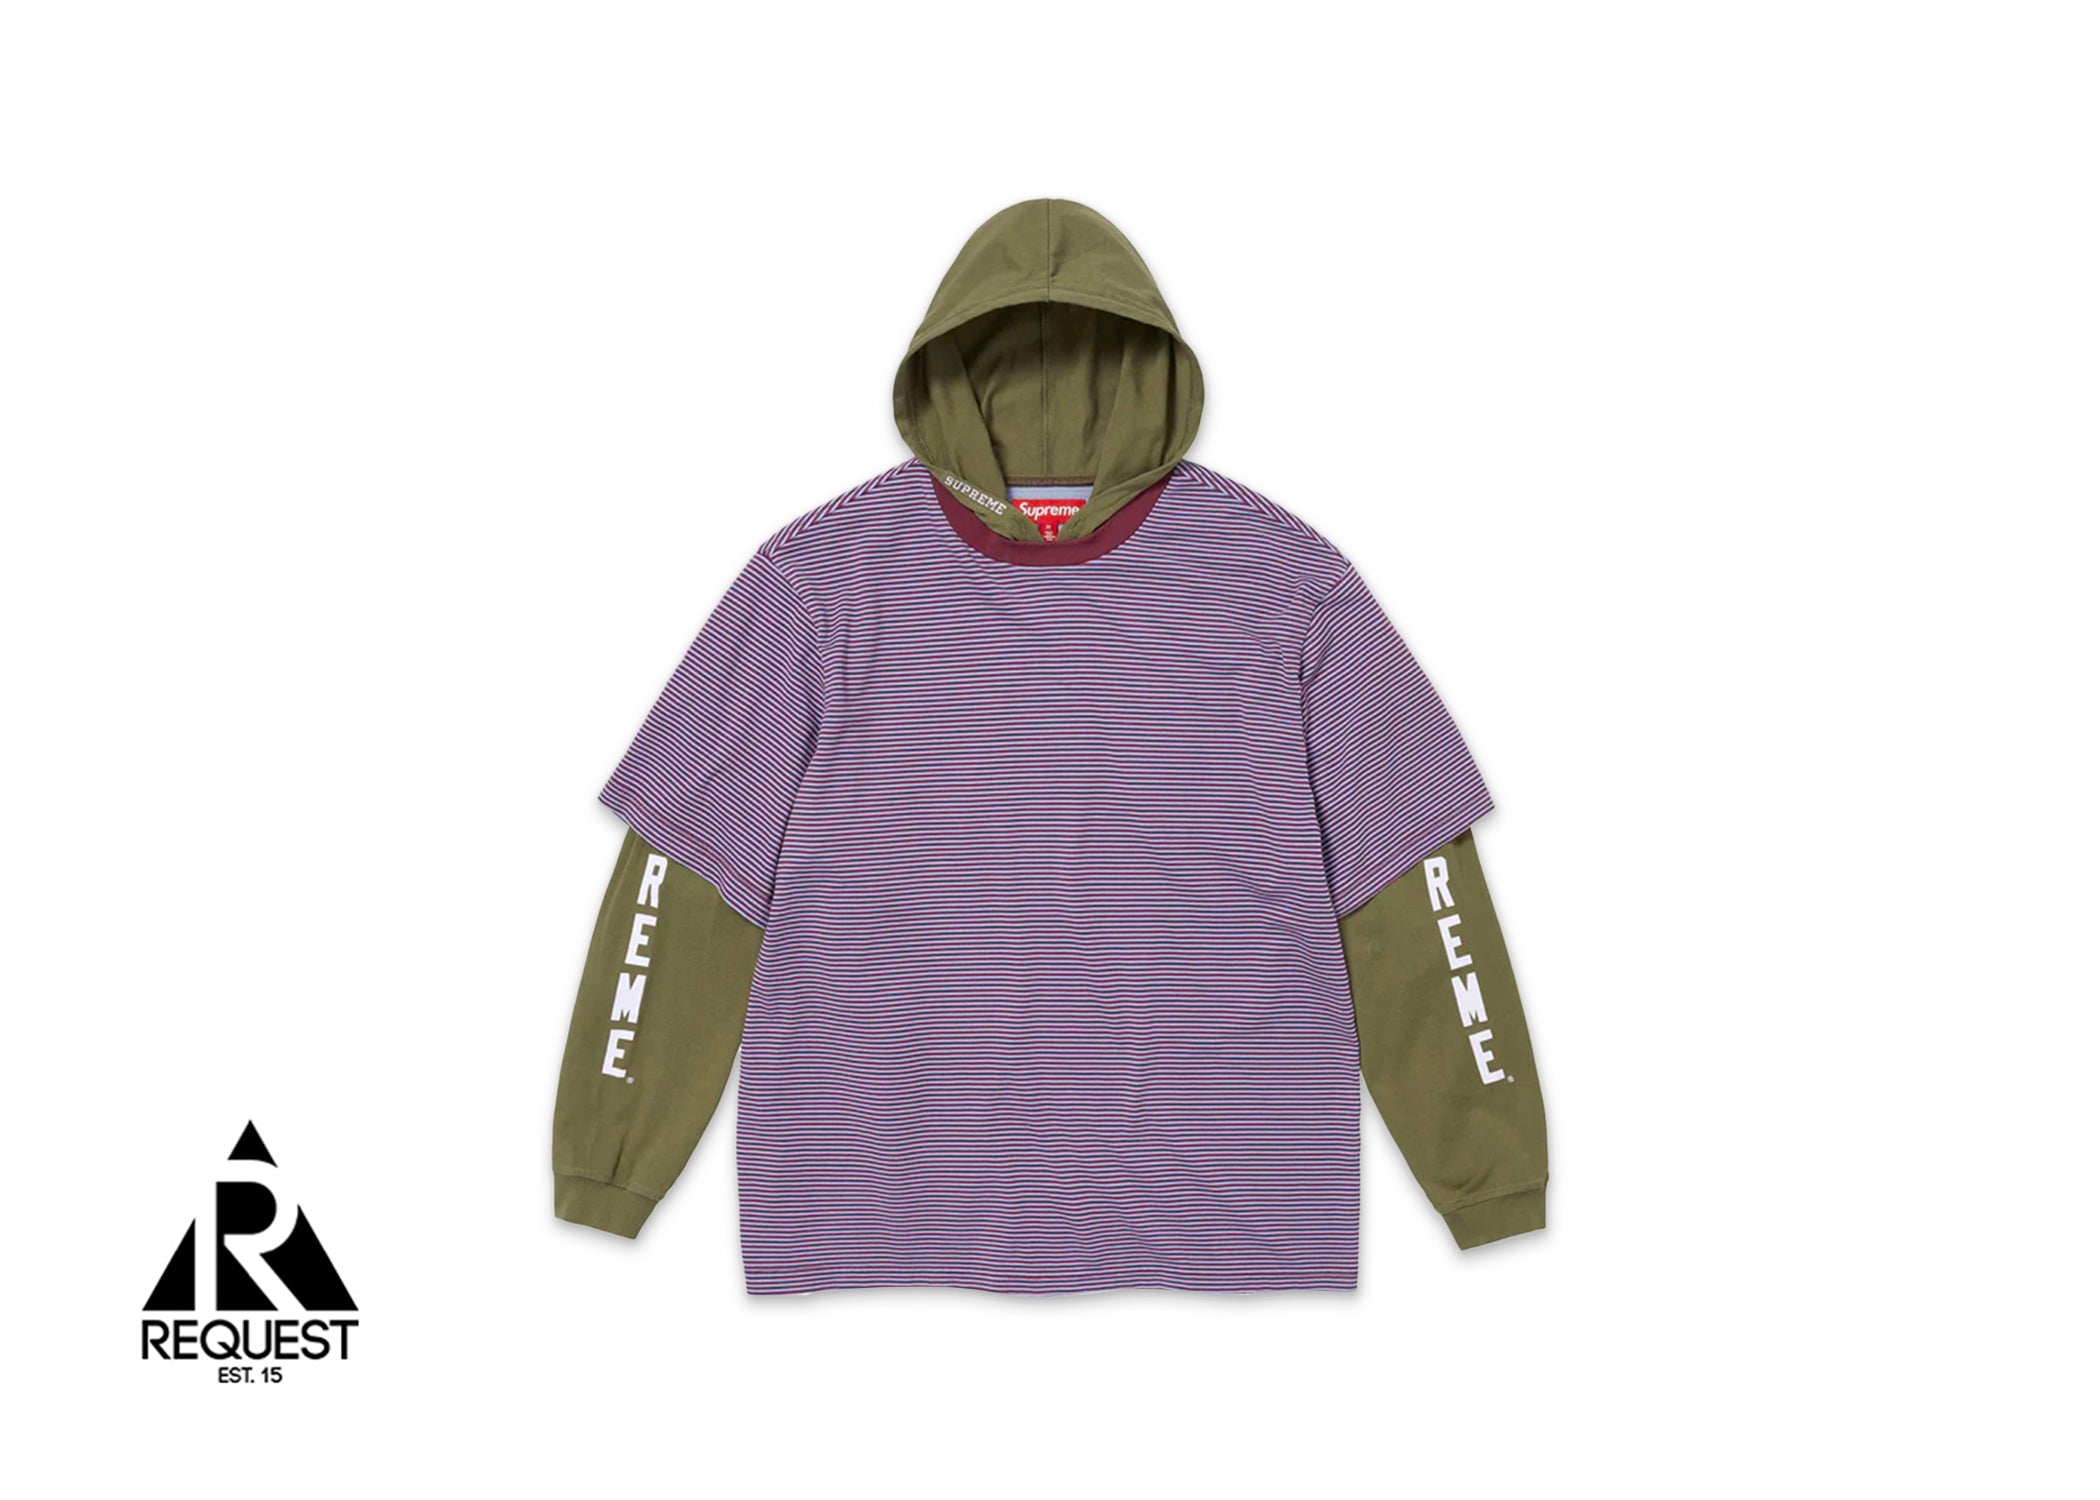 Supreme Layered Hooded L/S Top "Olive"